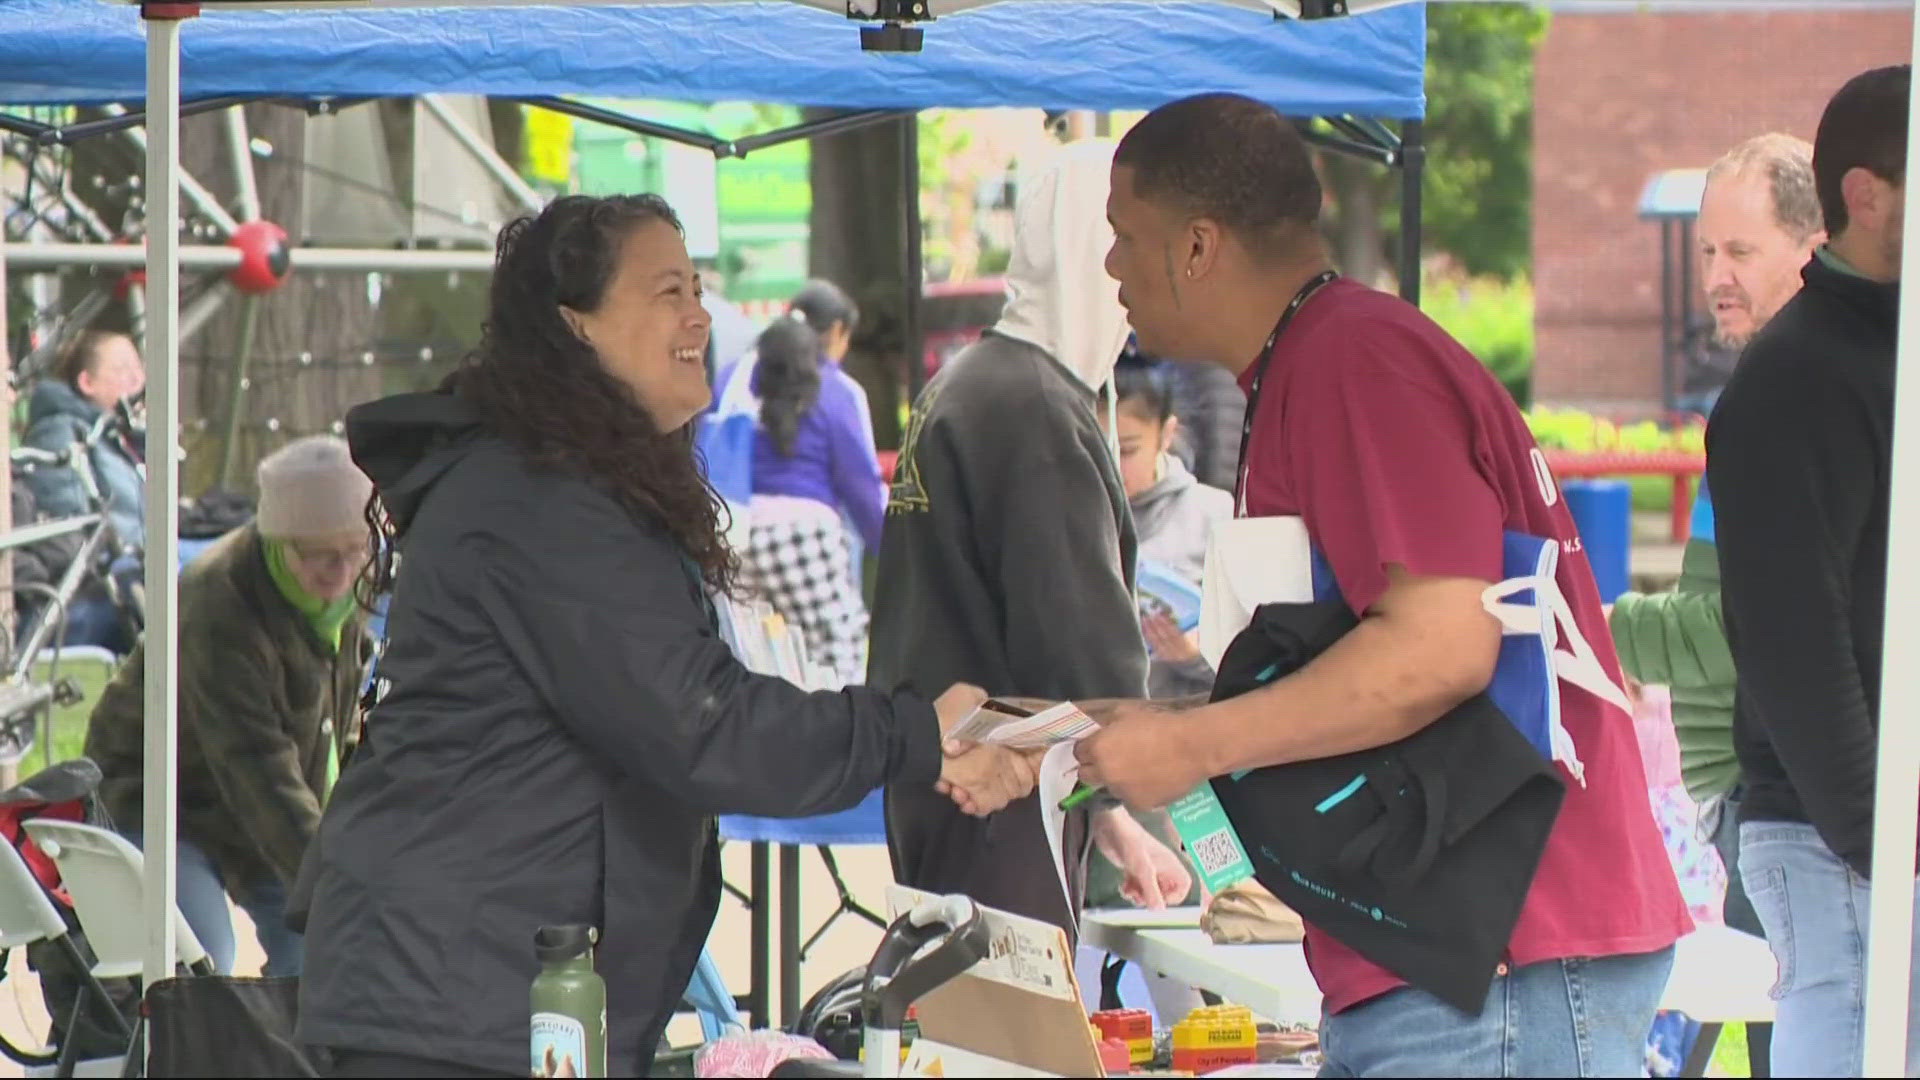 Portland's Safe Blocks Program took over Dawson Park to bring resources to those in need.